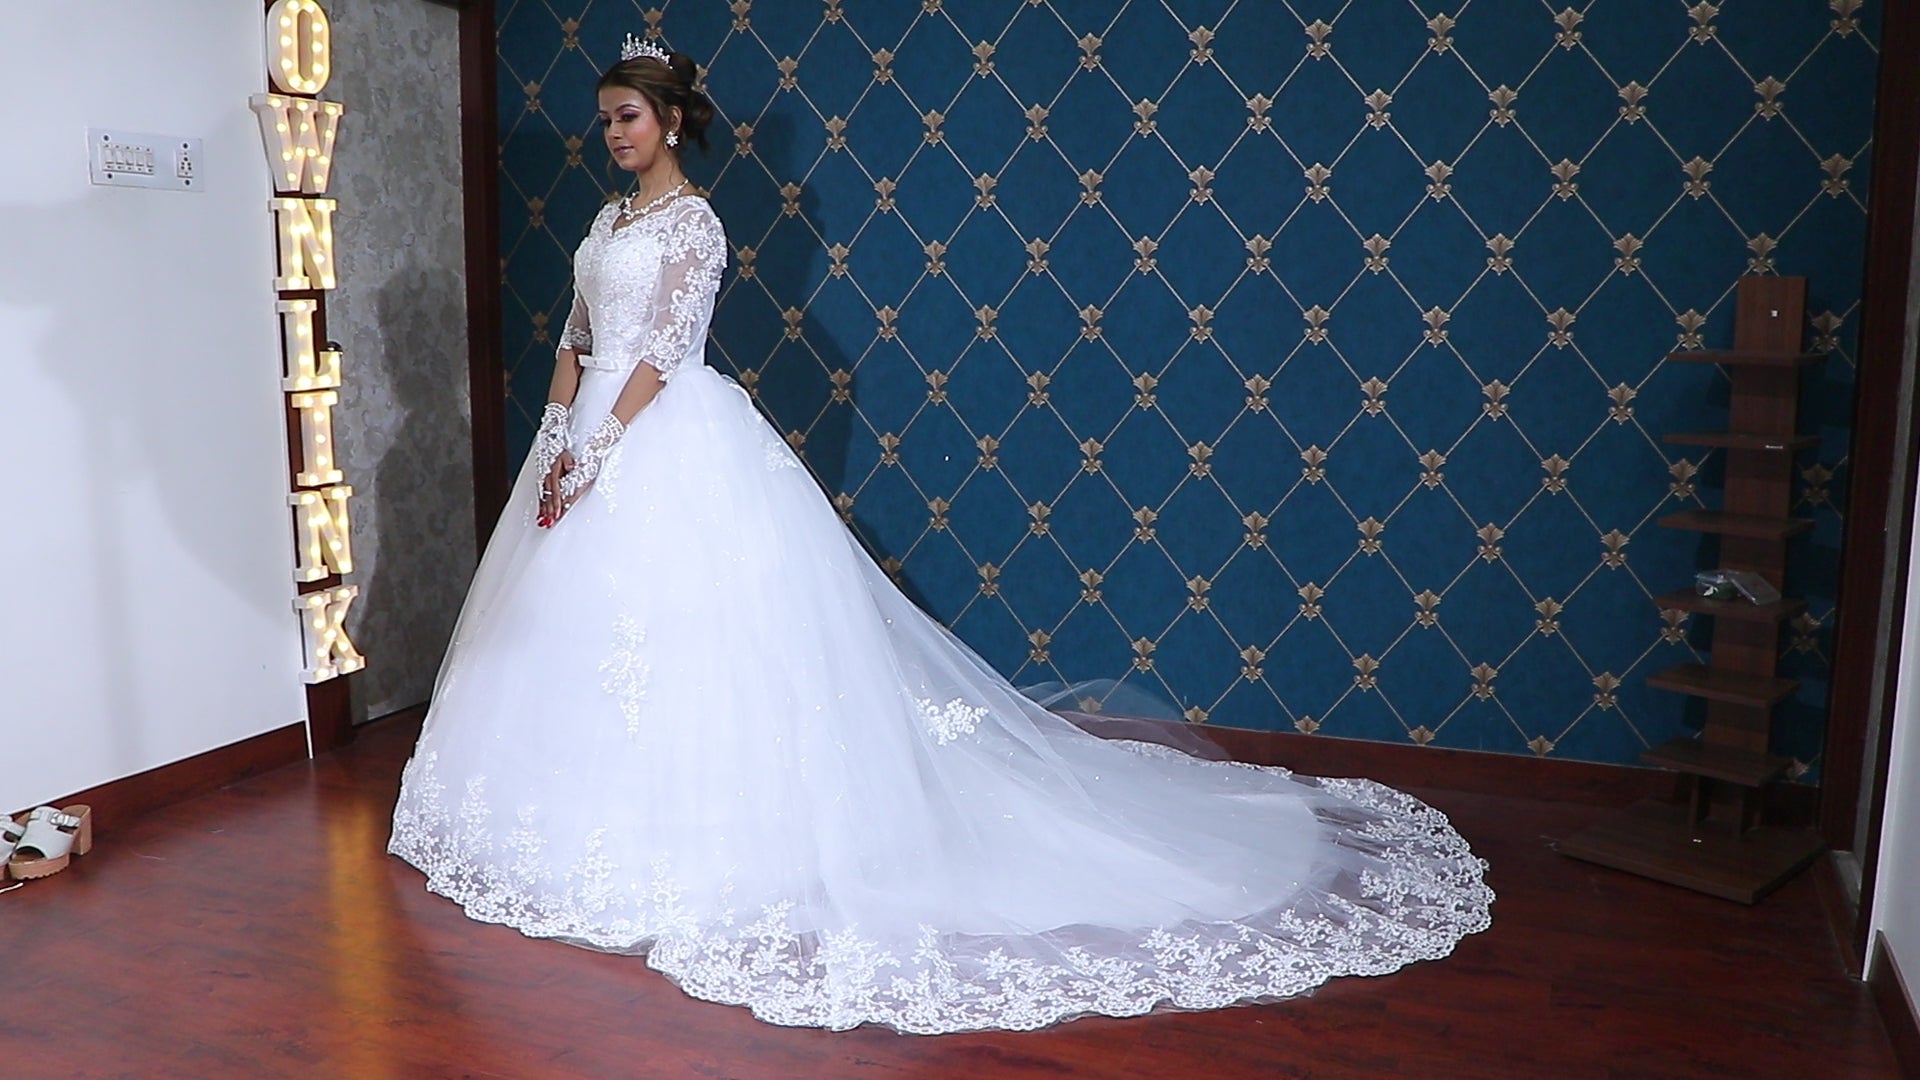 White bridal trail gown/dress with a train in Jaipur Rajasthan